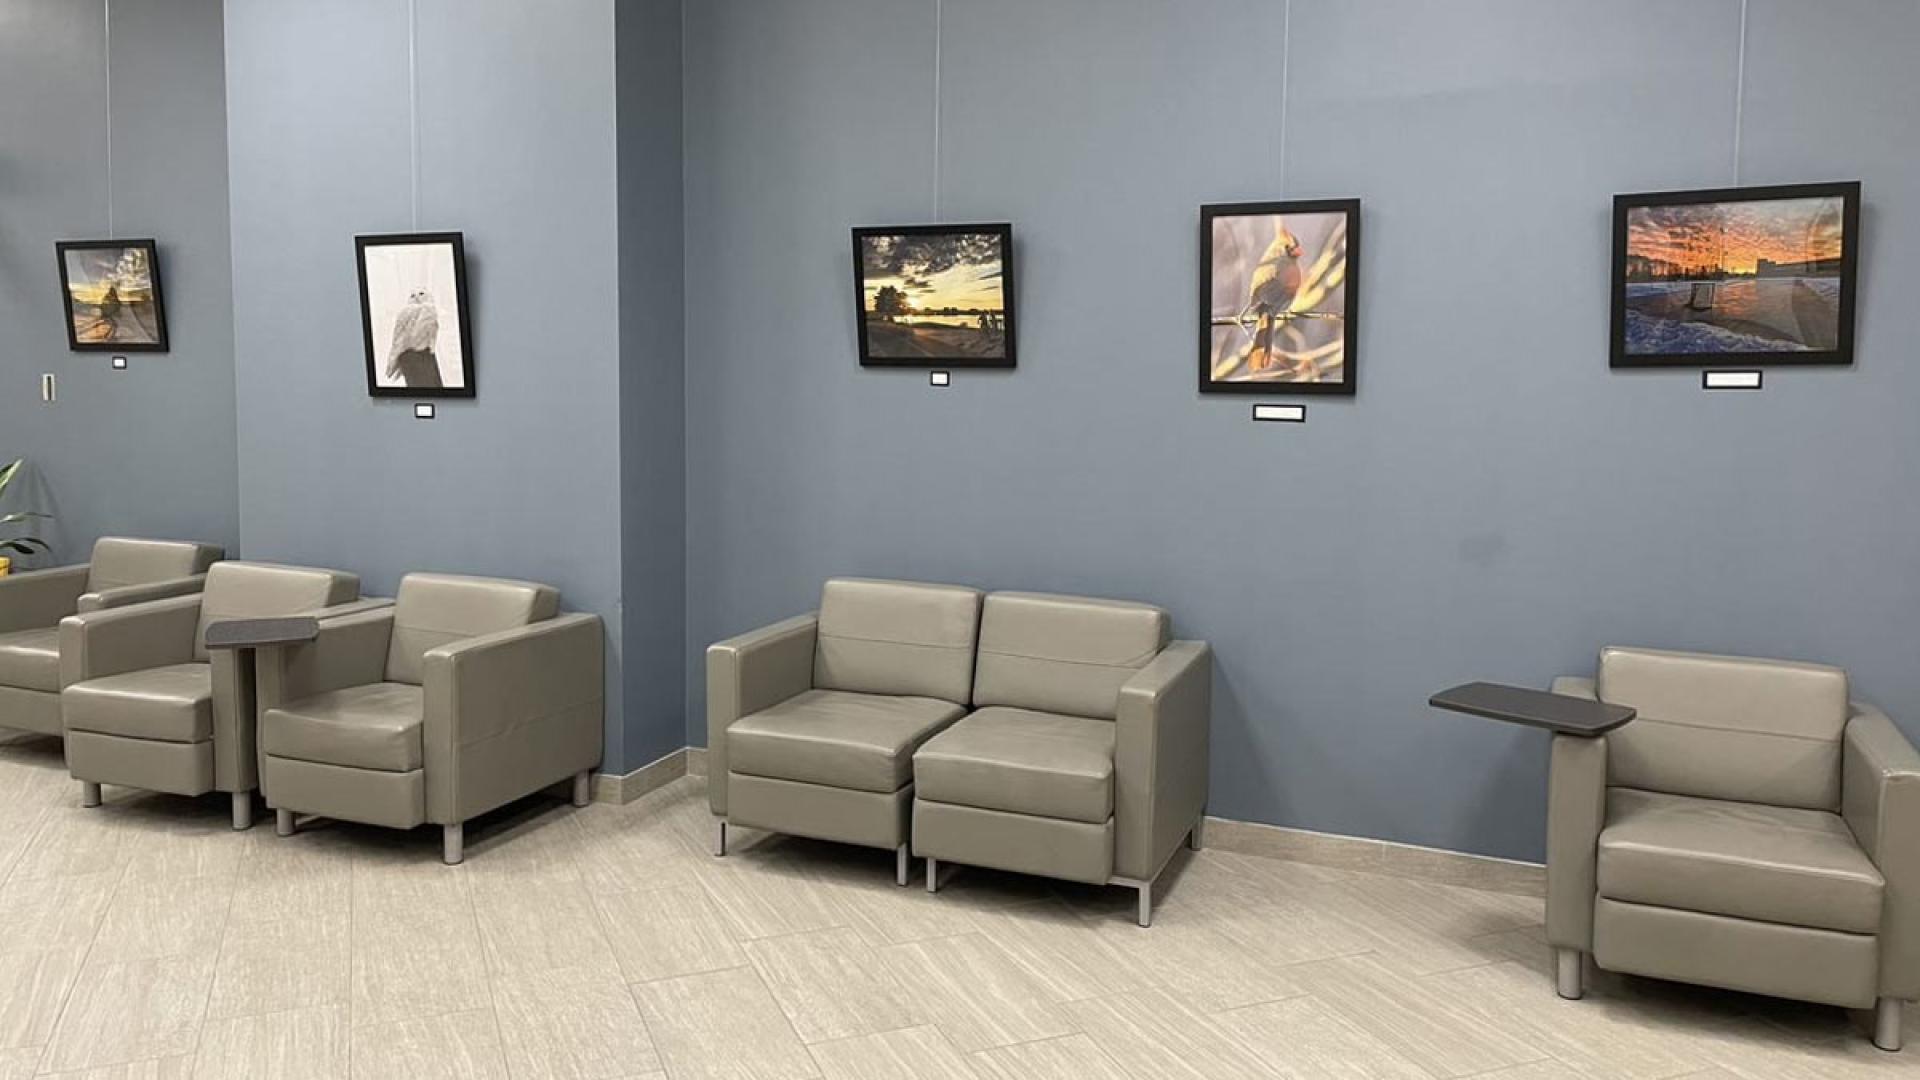 Artwork displayed on the walls of the First Floor Gallery, Barrie City Hall